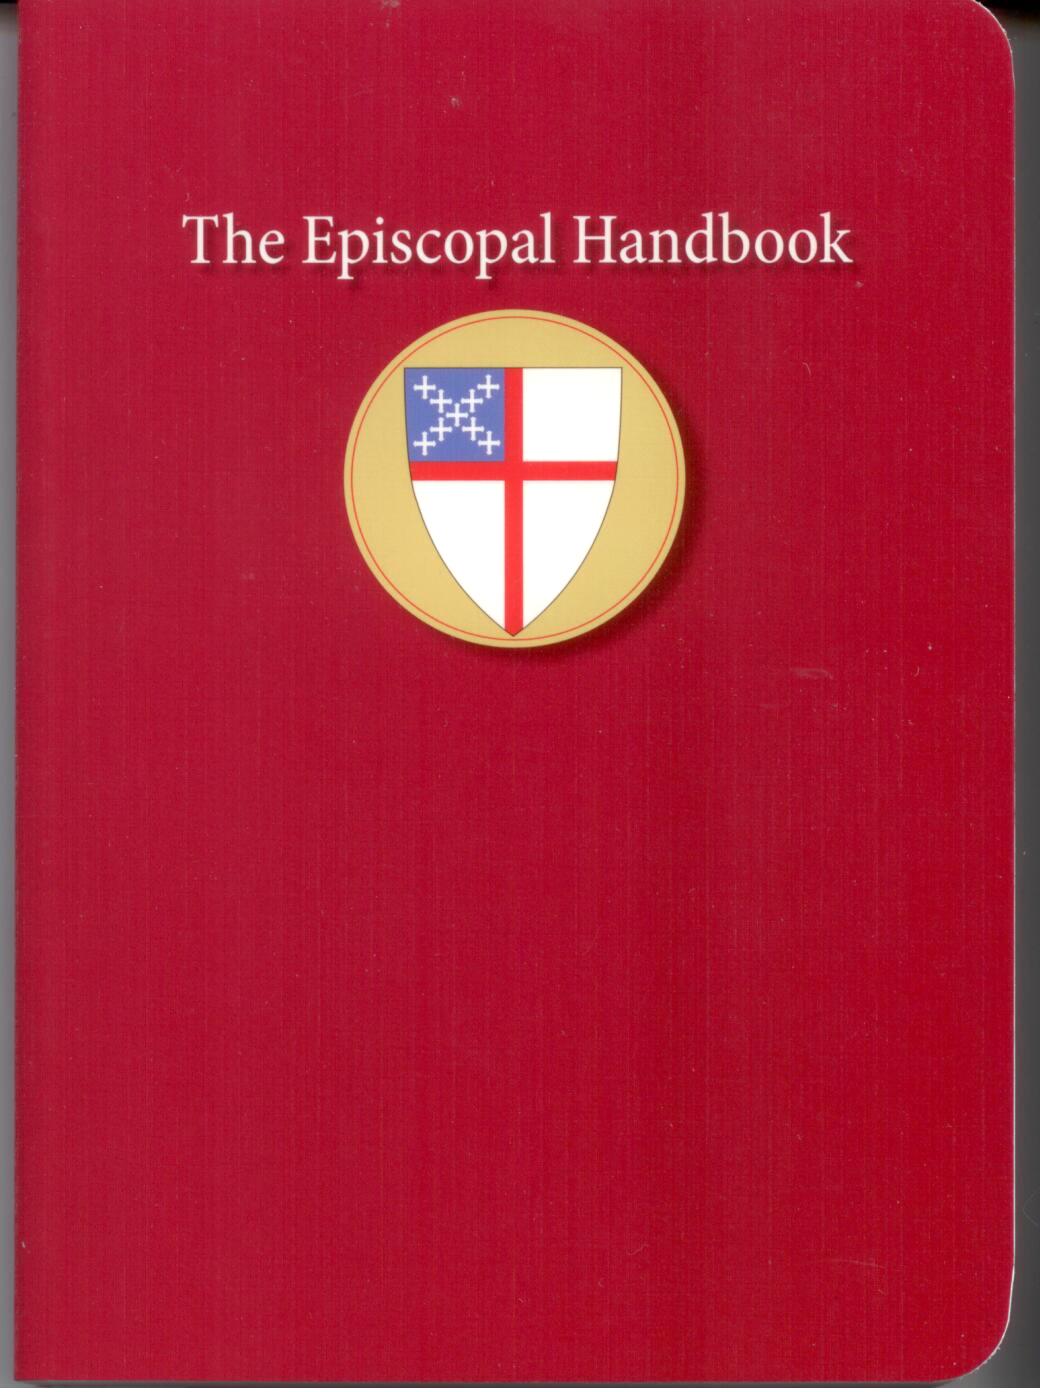 The Episcopal Handbook by Morehouse Publishing